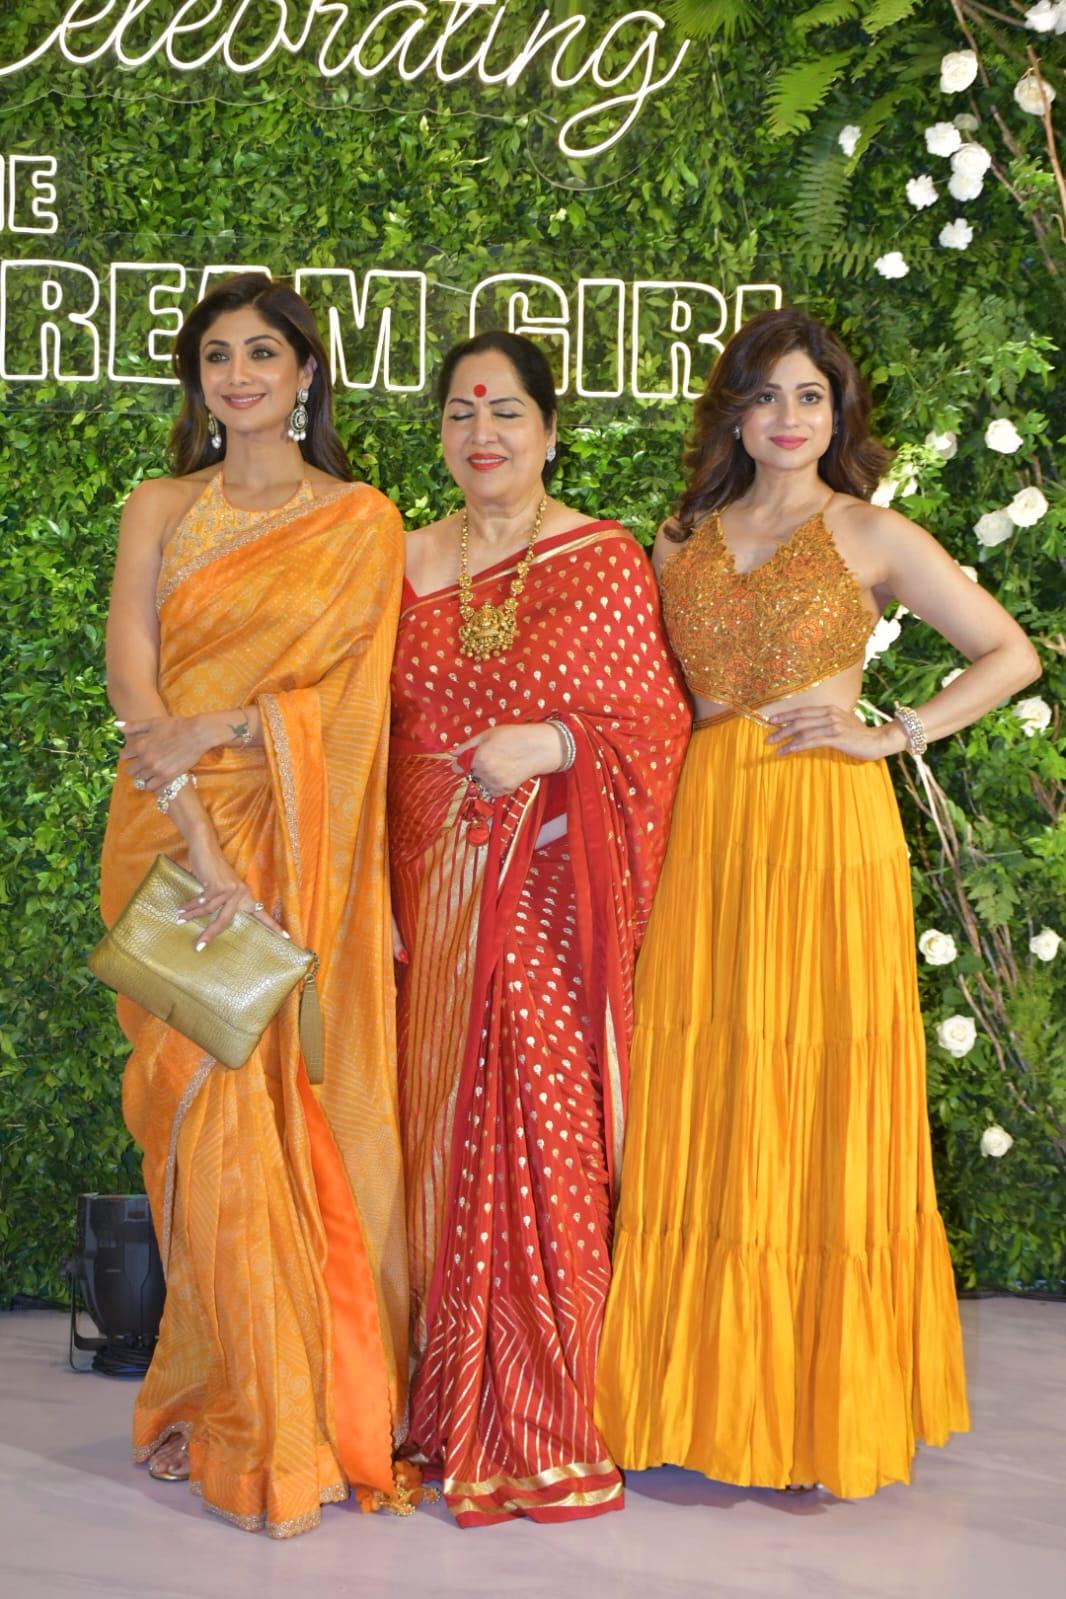 Shilpa Shetty looked stunning. She was accompanied by Shamita Shetty and their mother!